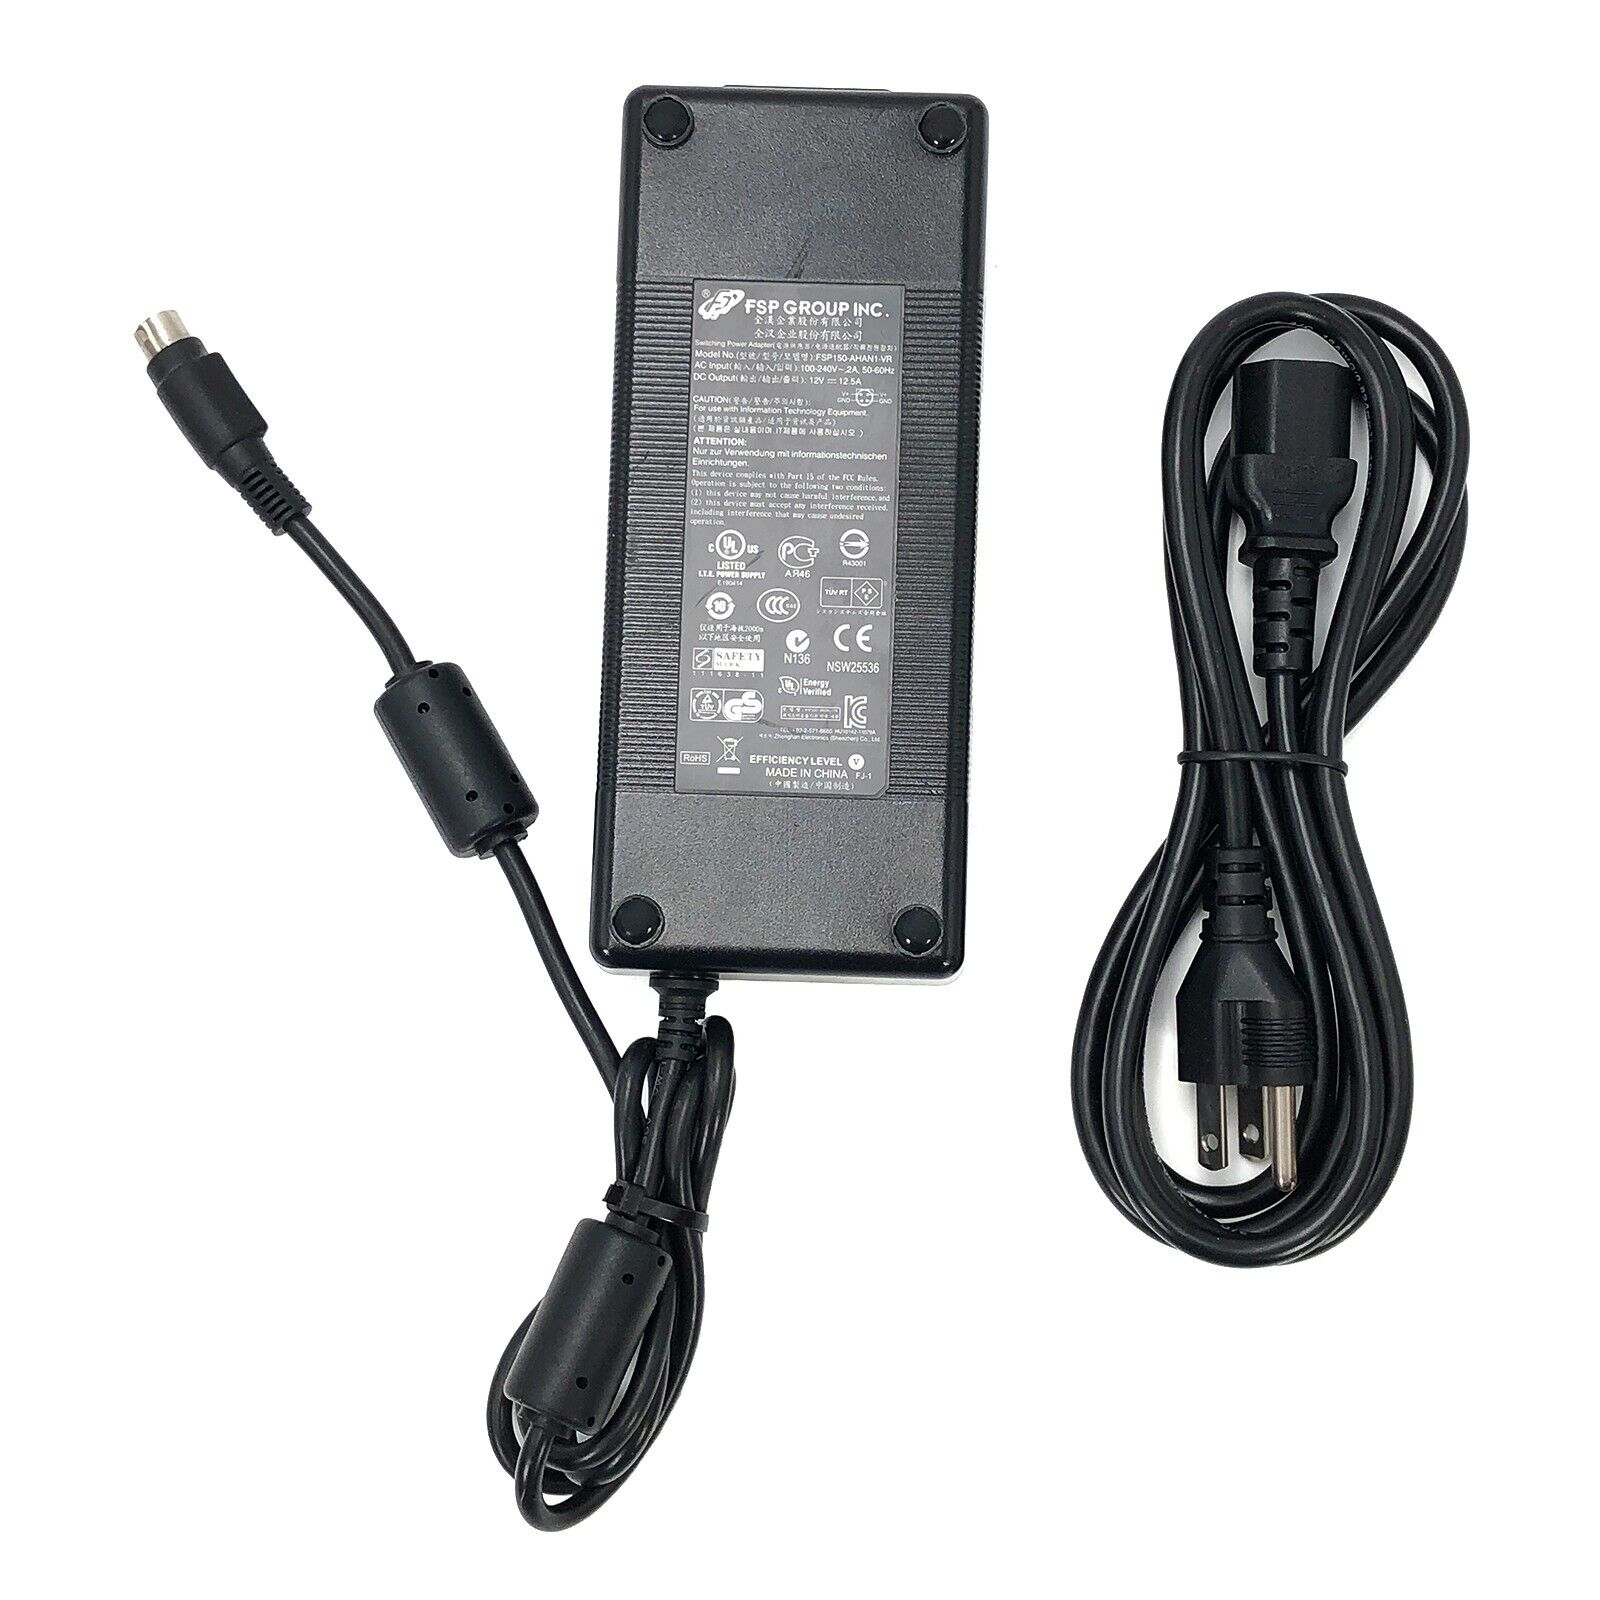 *Brand NEW*Original FSP 12V 12.5A 150W AC Adapter for Synology DS414 DS414j DS418play DS418j NAS Power Supply